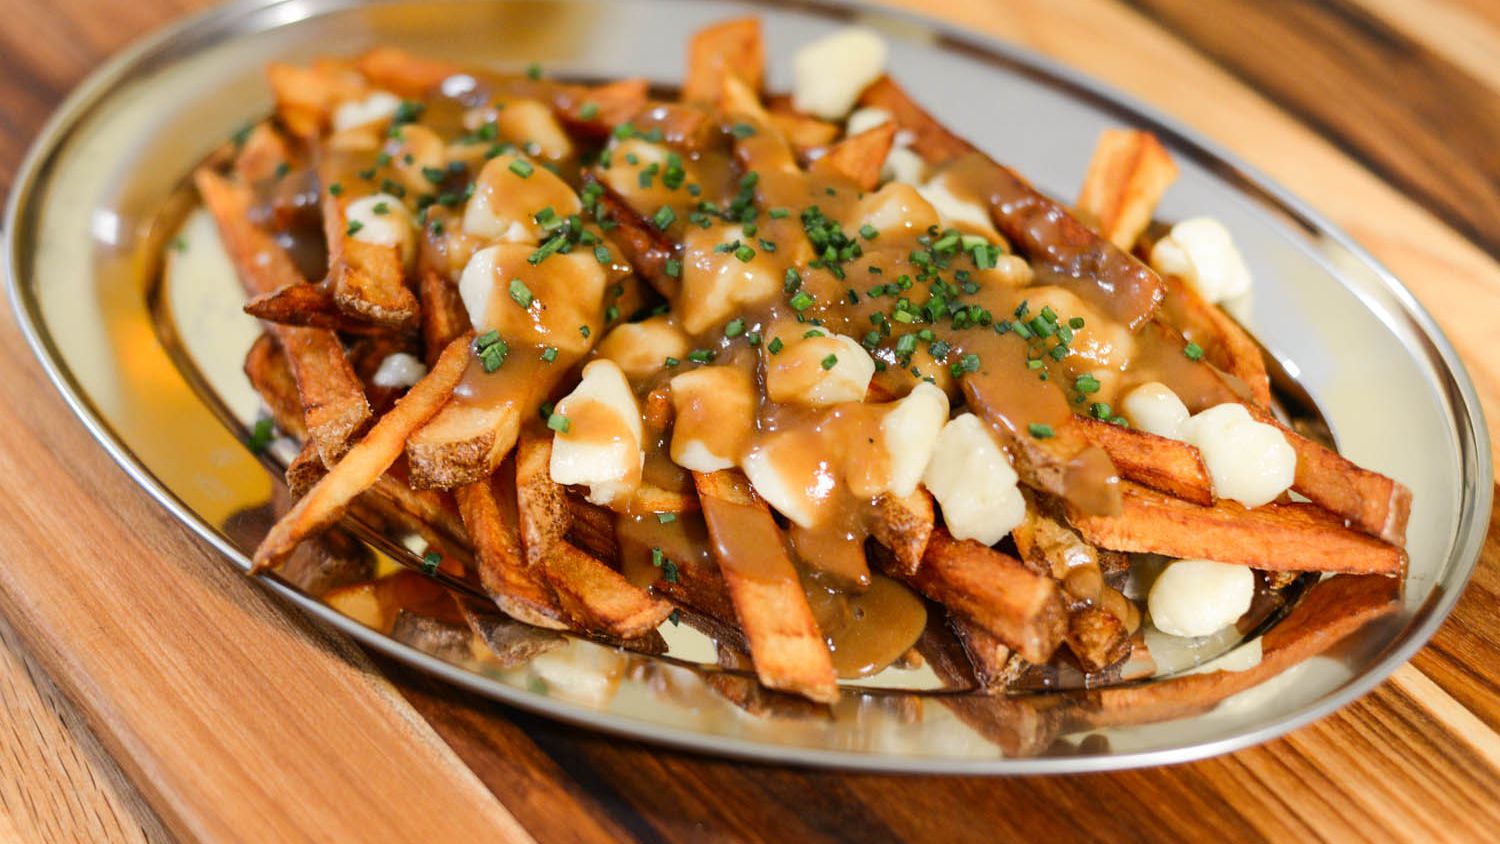 National Dish of Canada - Poutine